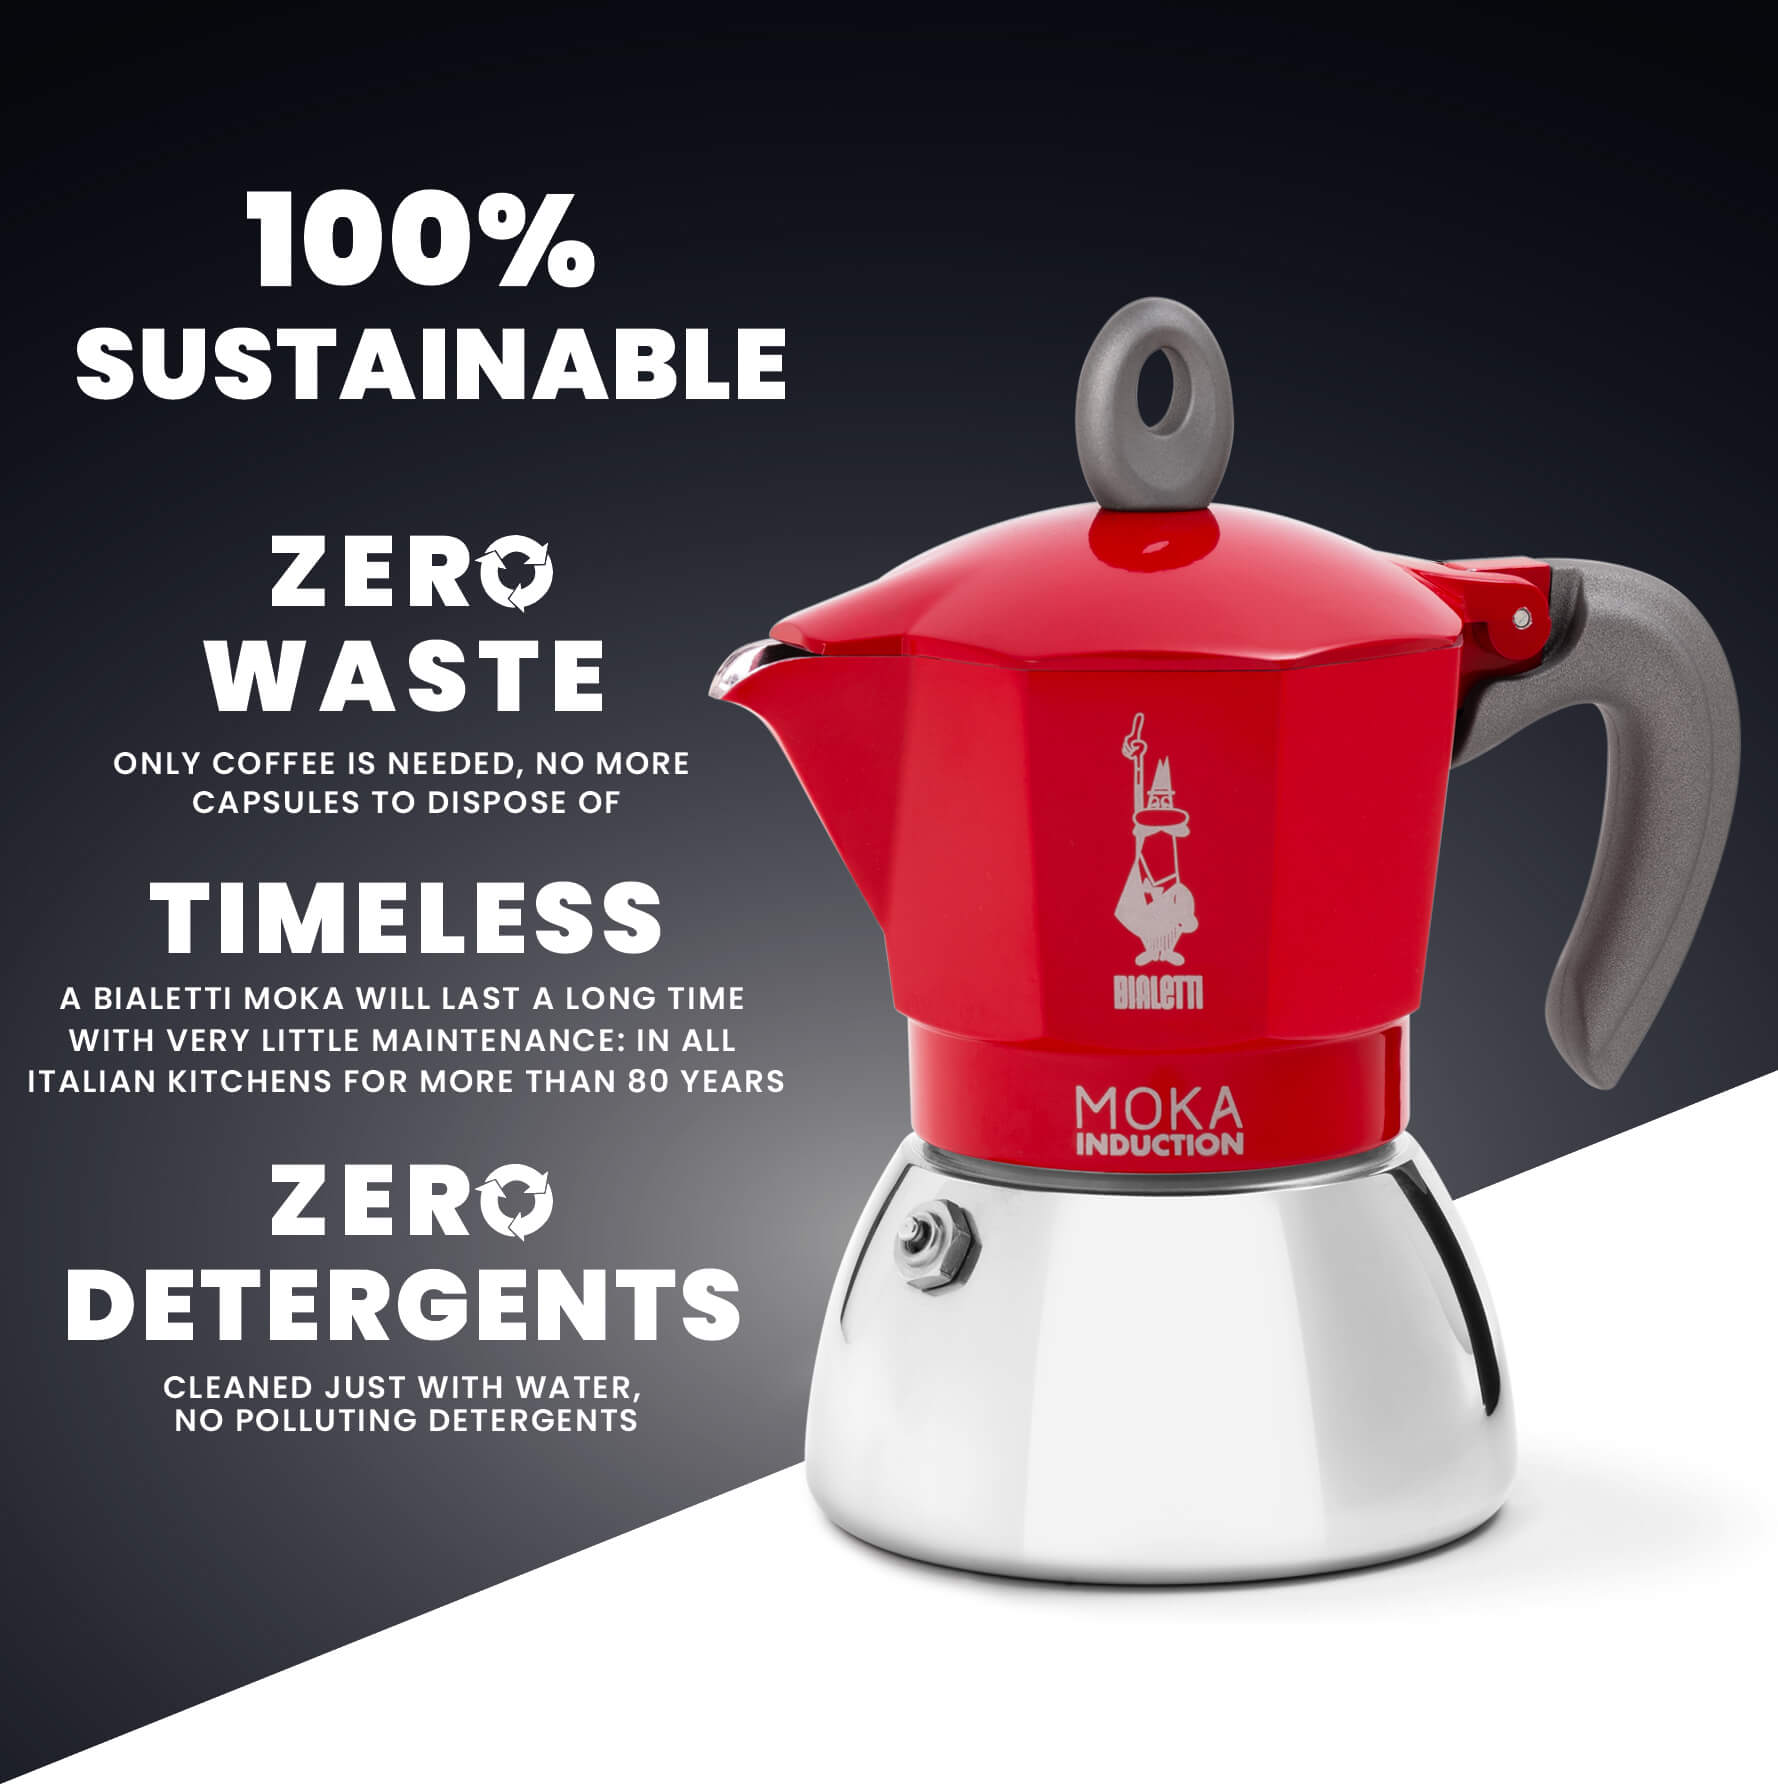 Bialetti Moka Induction red - Interismo Online Shop Global